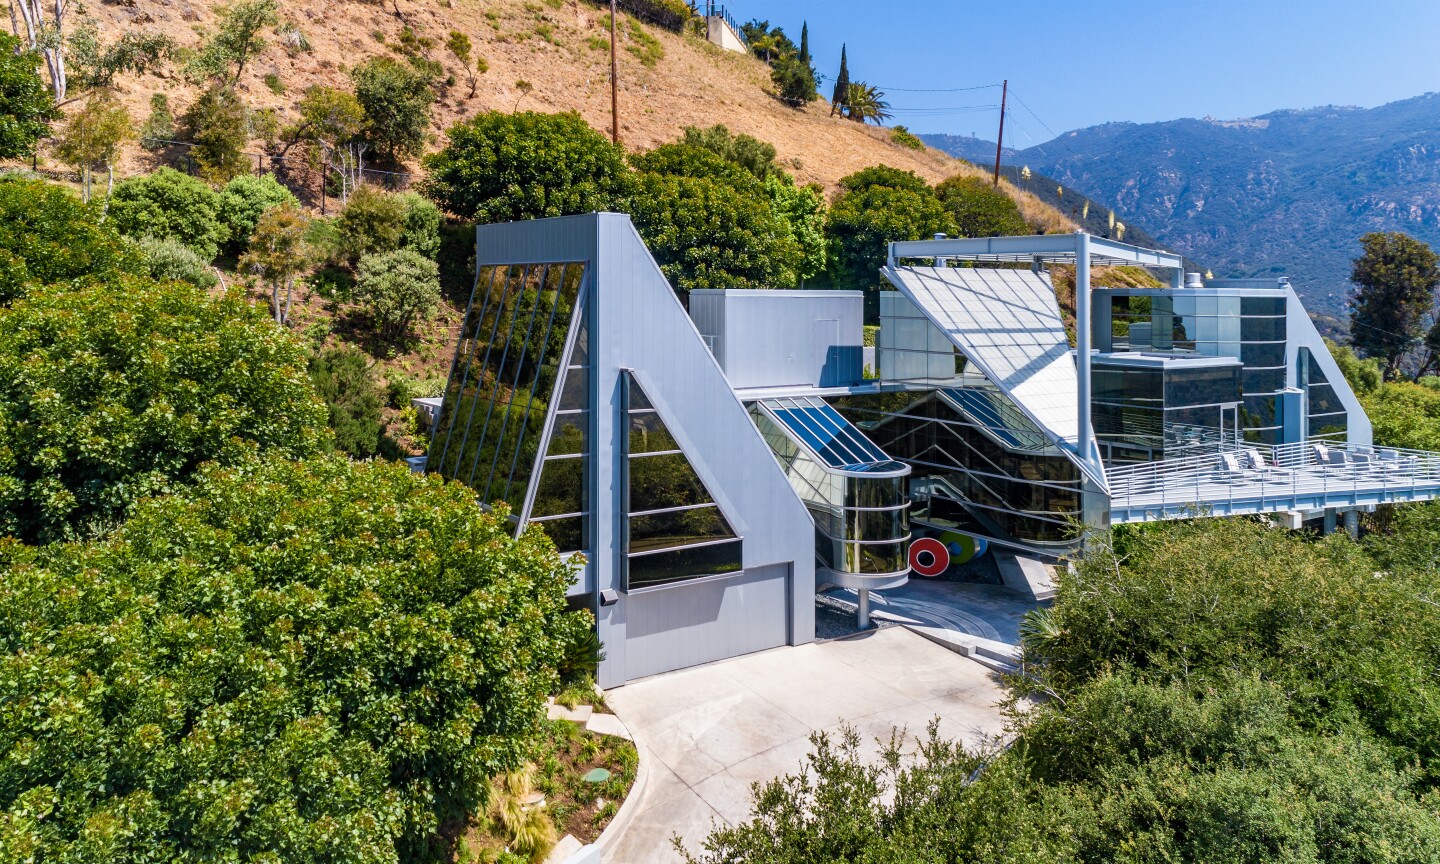 Built in 1998, the two-story home resembles a power plant with its jagged edges, glass turrets and industrial vibes.